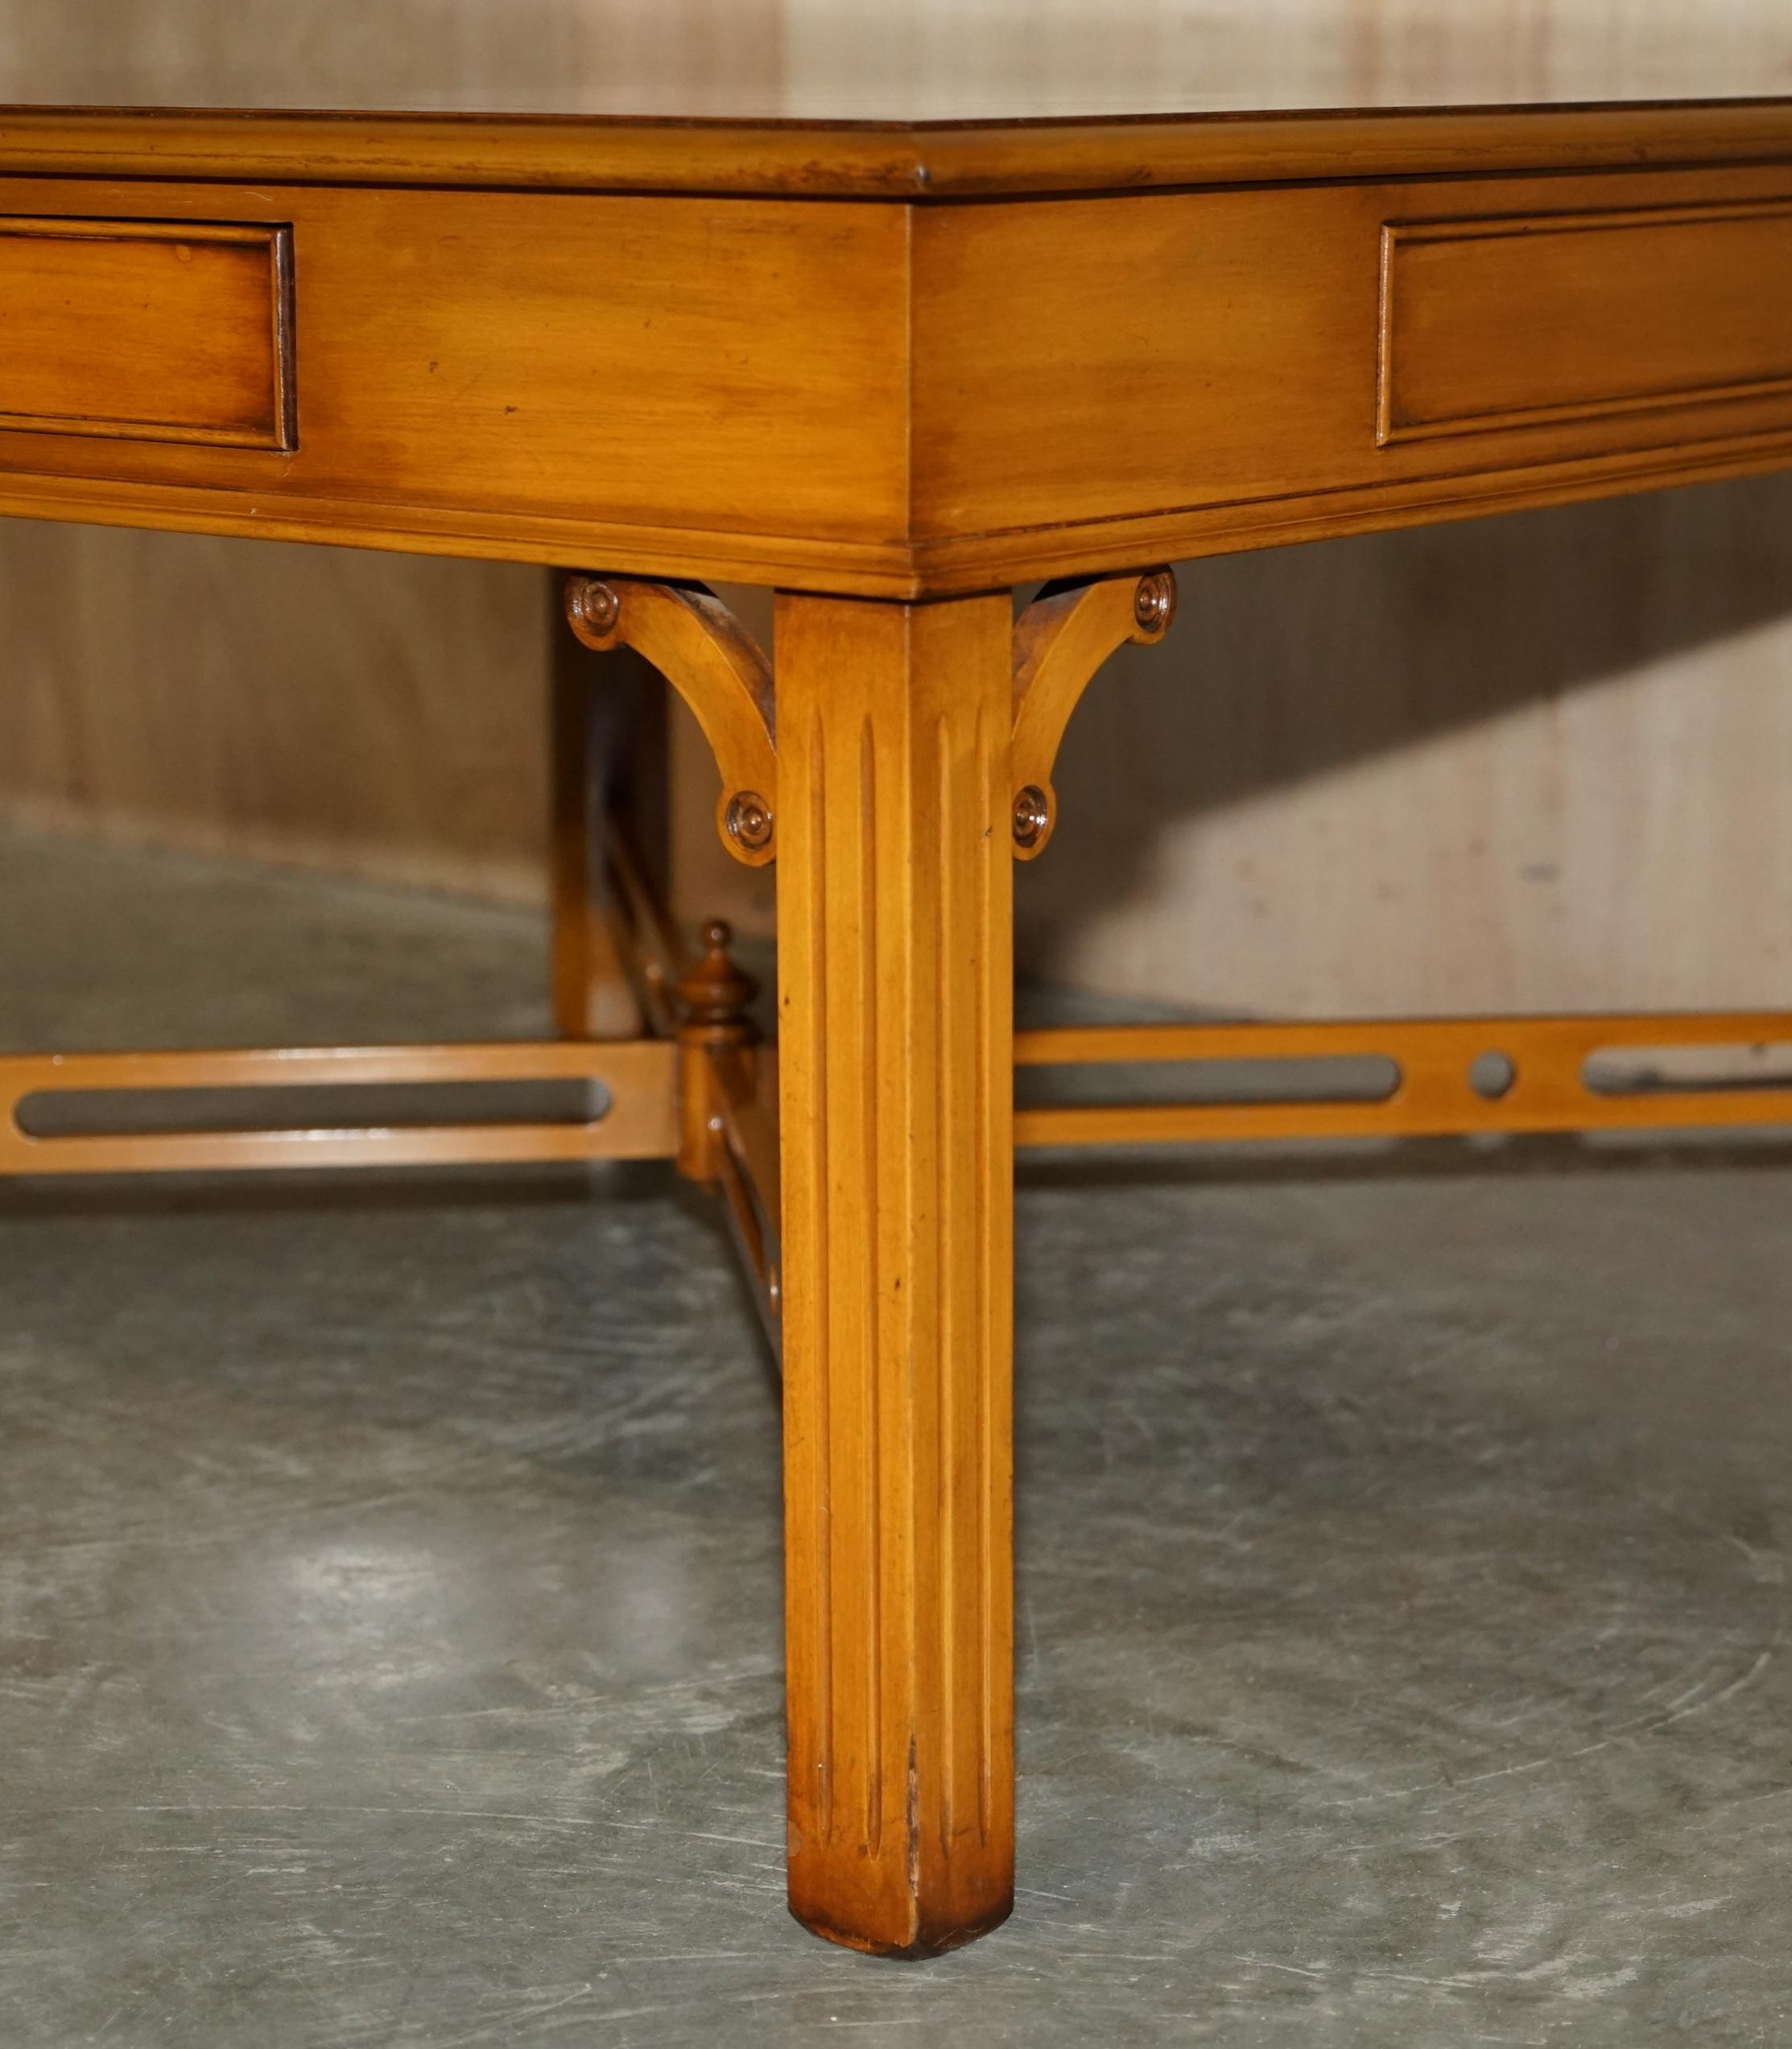 LOVELY BURR YEW WOOD TABLE COFFEE TABLE WiTH THOMAS CHIPPENDALE STRETCHES en vente 4